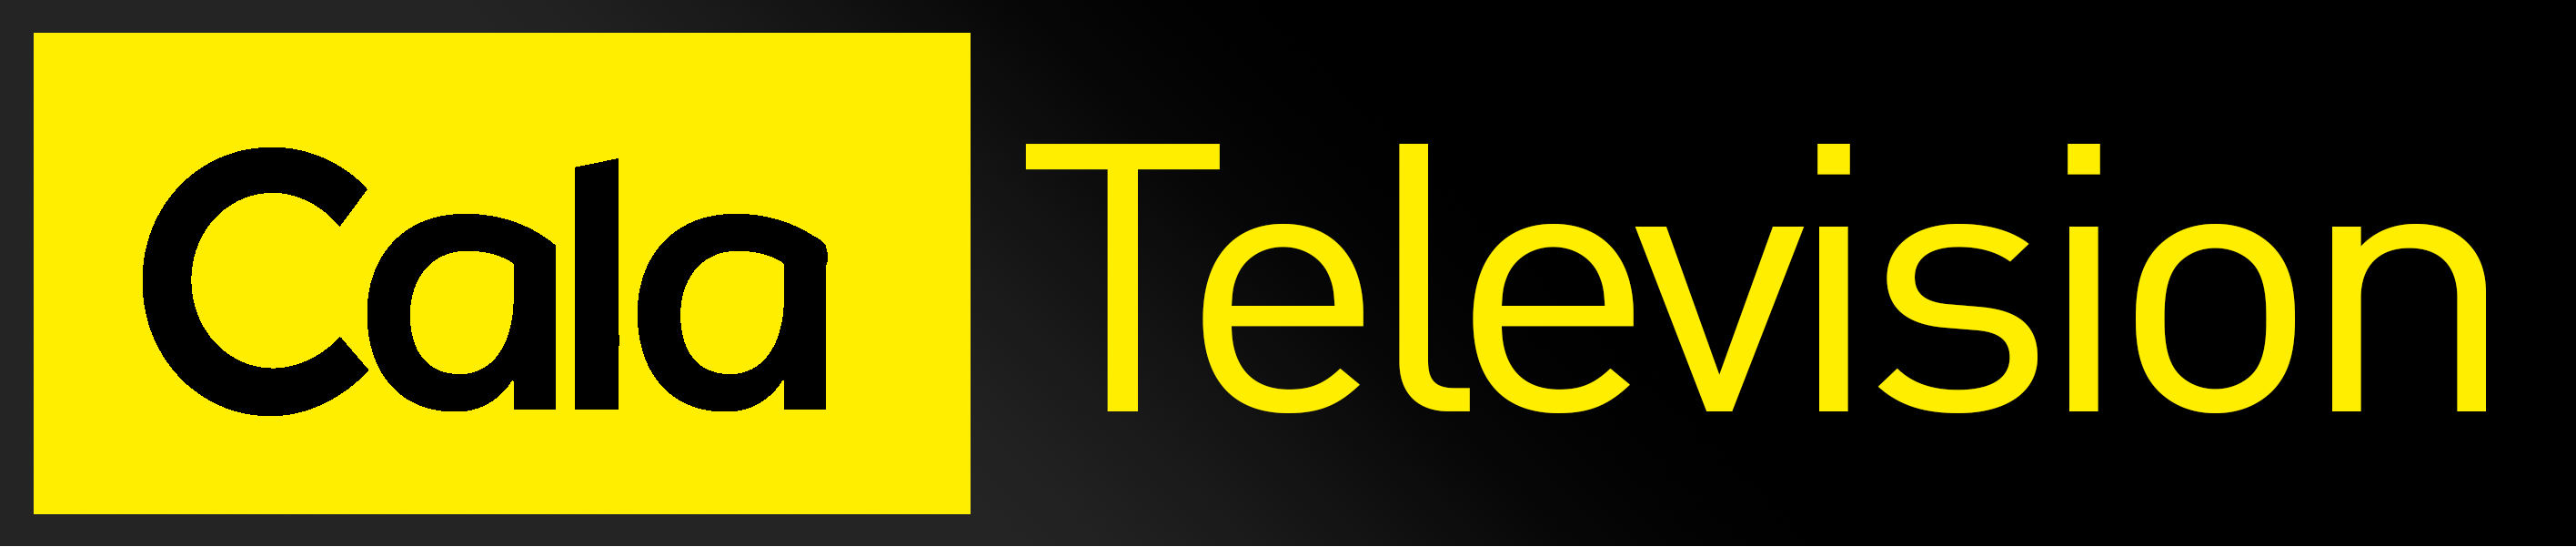 CalaTelevision - Black and Yellow New 2022